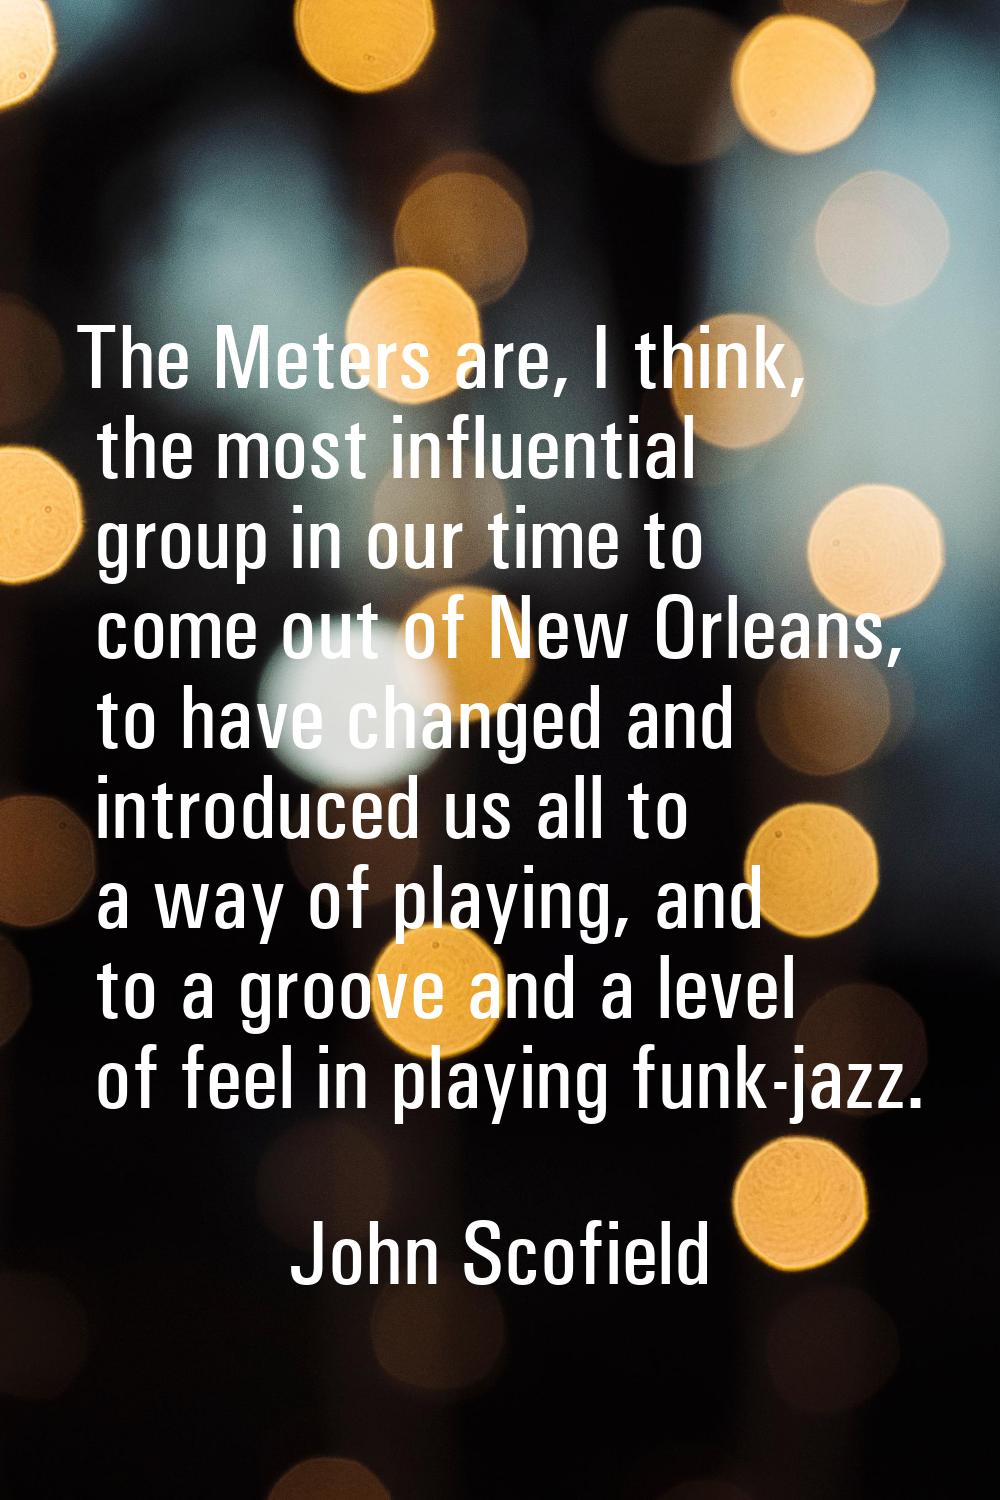 The Meters are, I think, the most influential group in our time to come out of New Orleans, to have